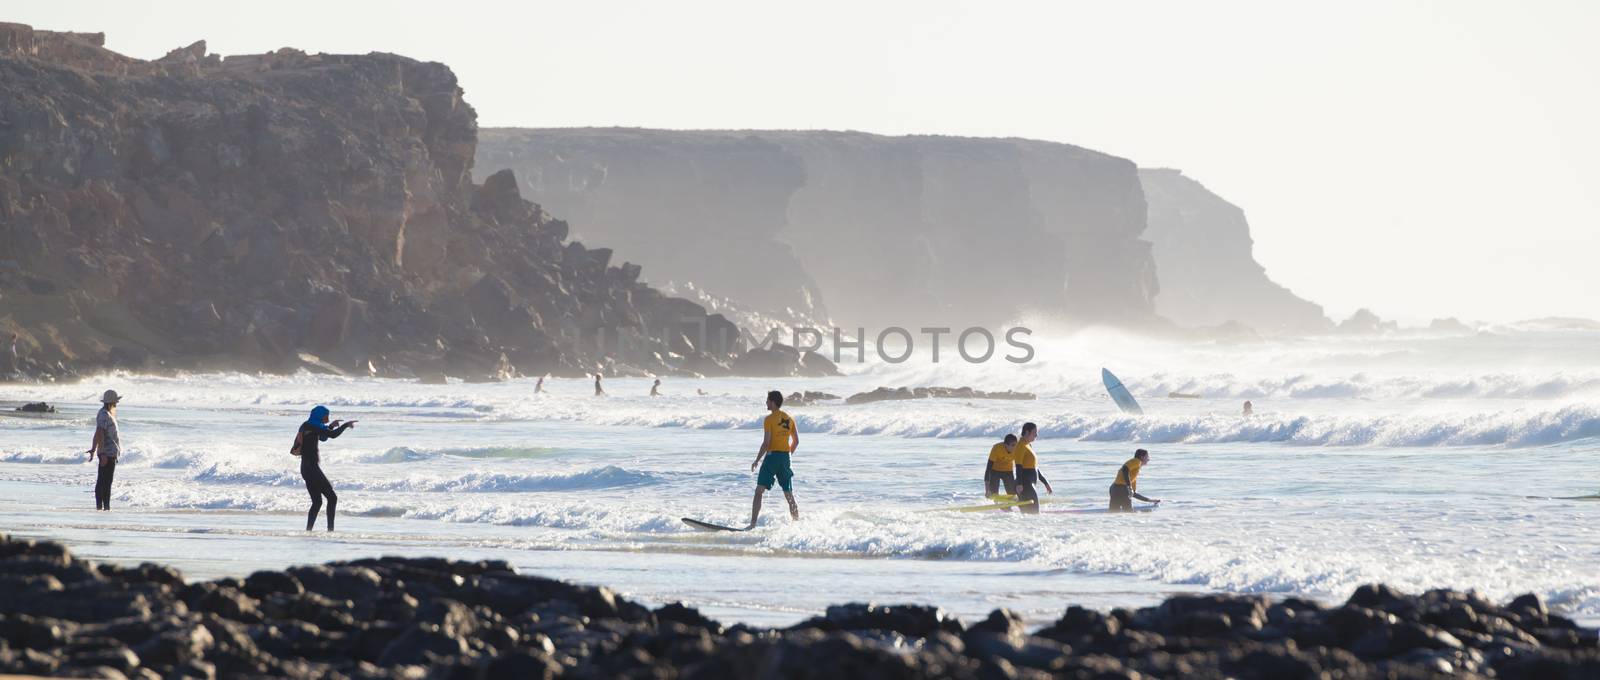 EL Cotillo, Spain - Dec 17, 2015:  Active sporty people having fun learning to surf on El Cotillo beach, famous surfing destination on Fuerteventura, Canary Islands, Spain on December 17, 2015. 